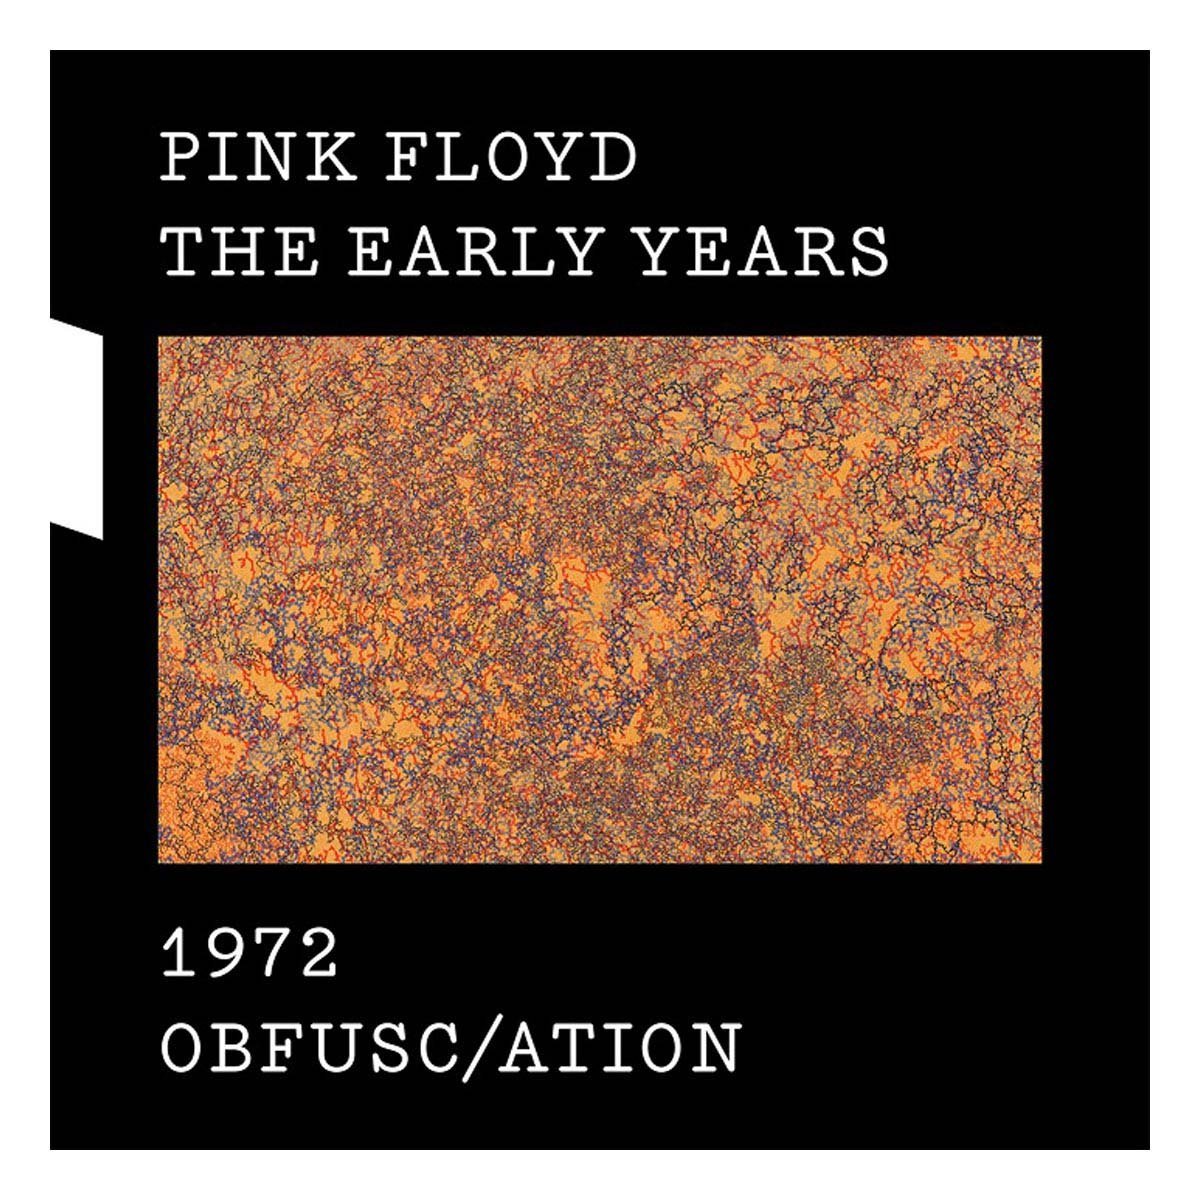 Cd Pink Floyd 1972 Obfuscation